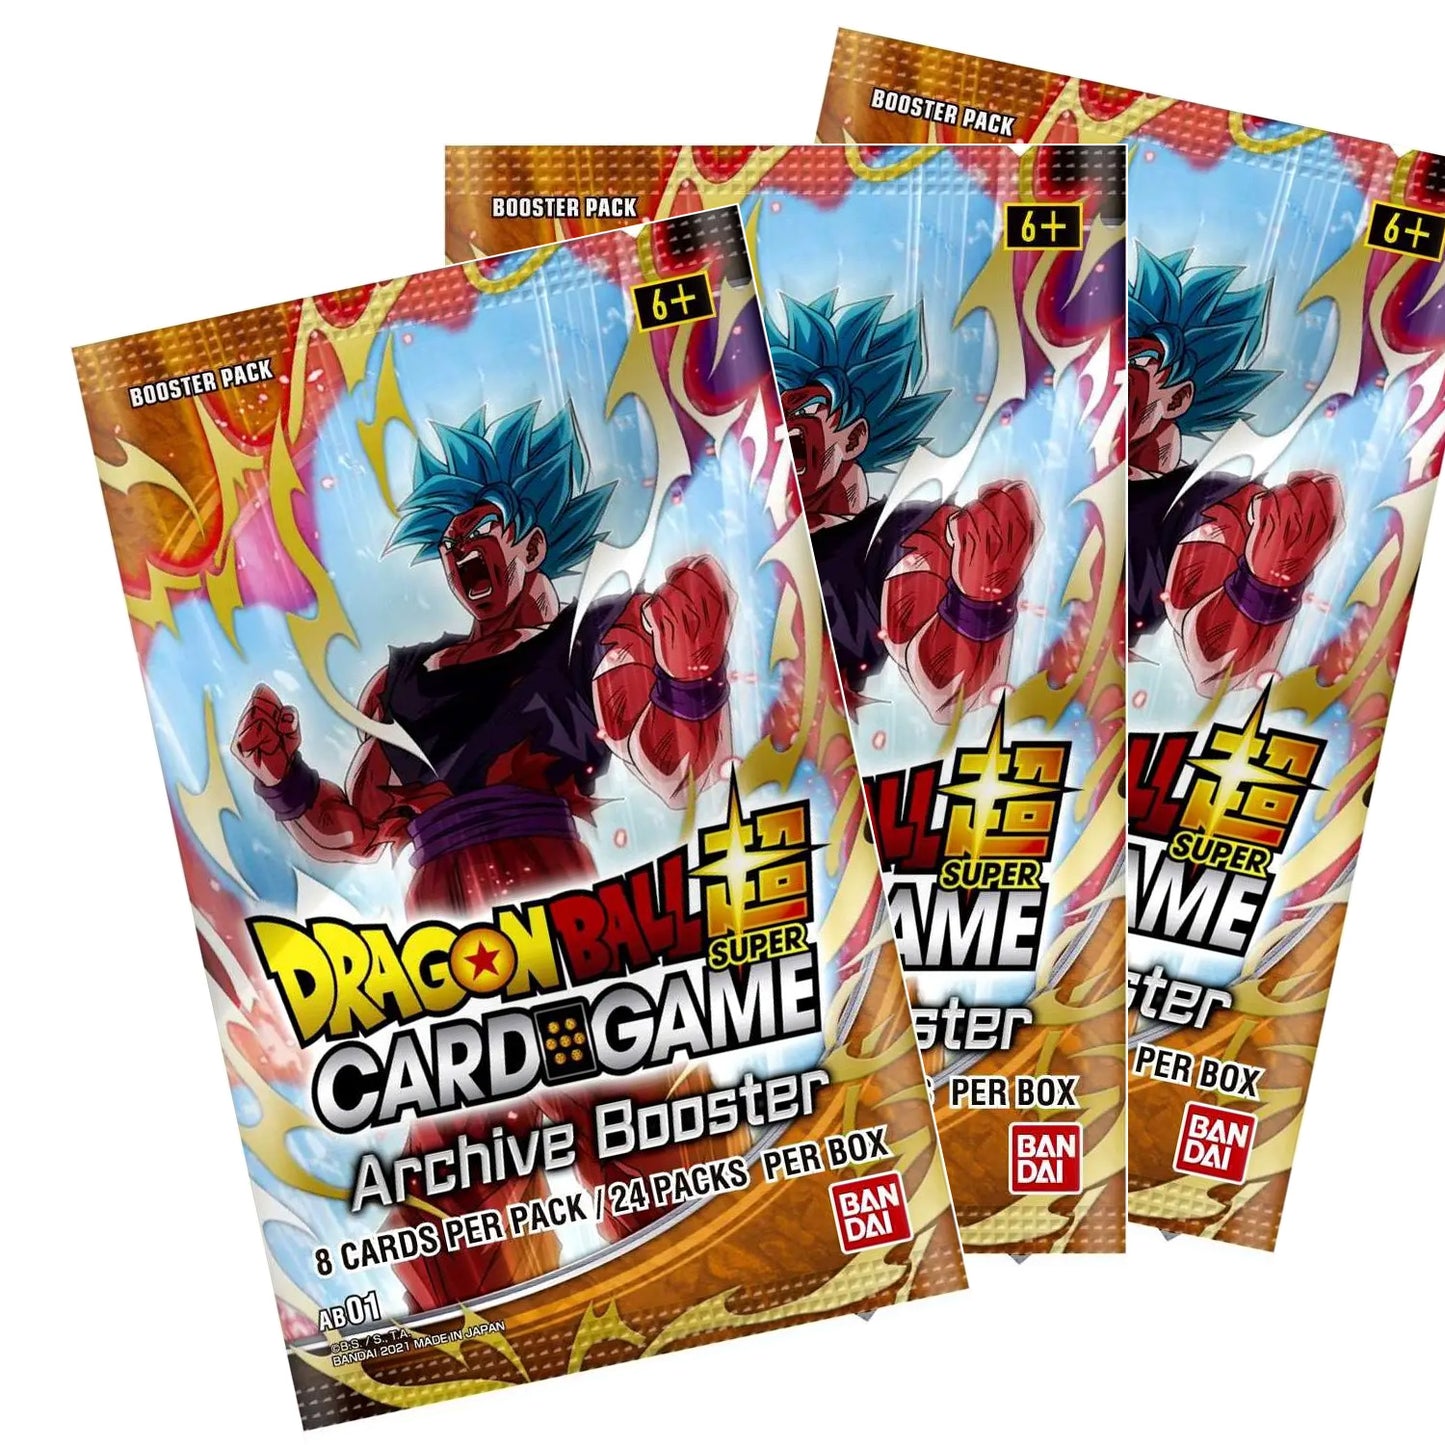 Dragon Ball Z Super Card Game Archive Booster Packs Stock Photo highlighting 3 packs